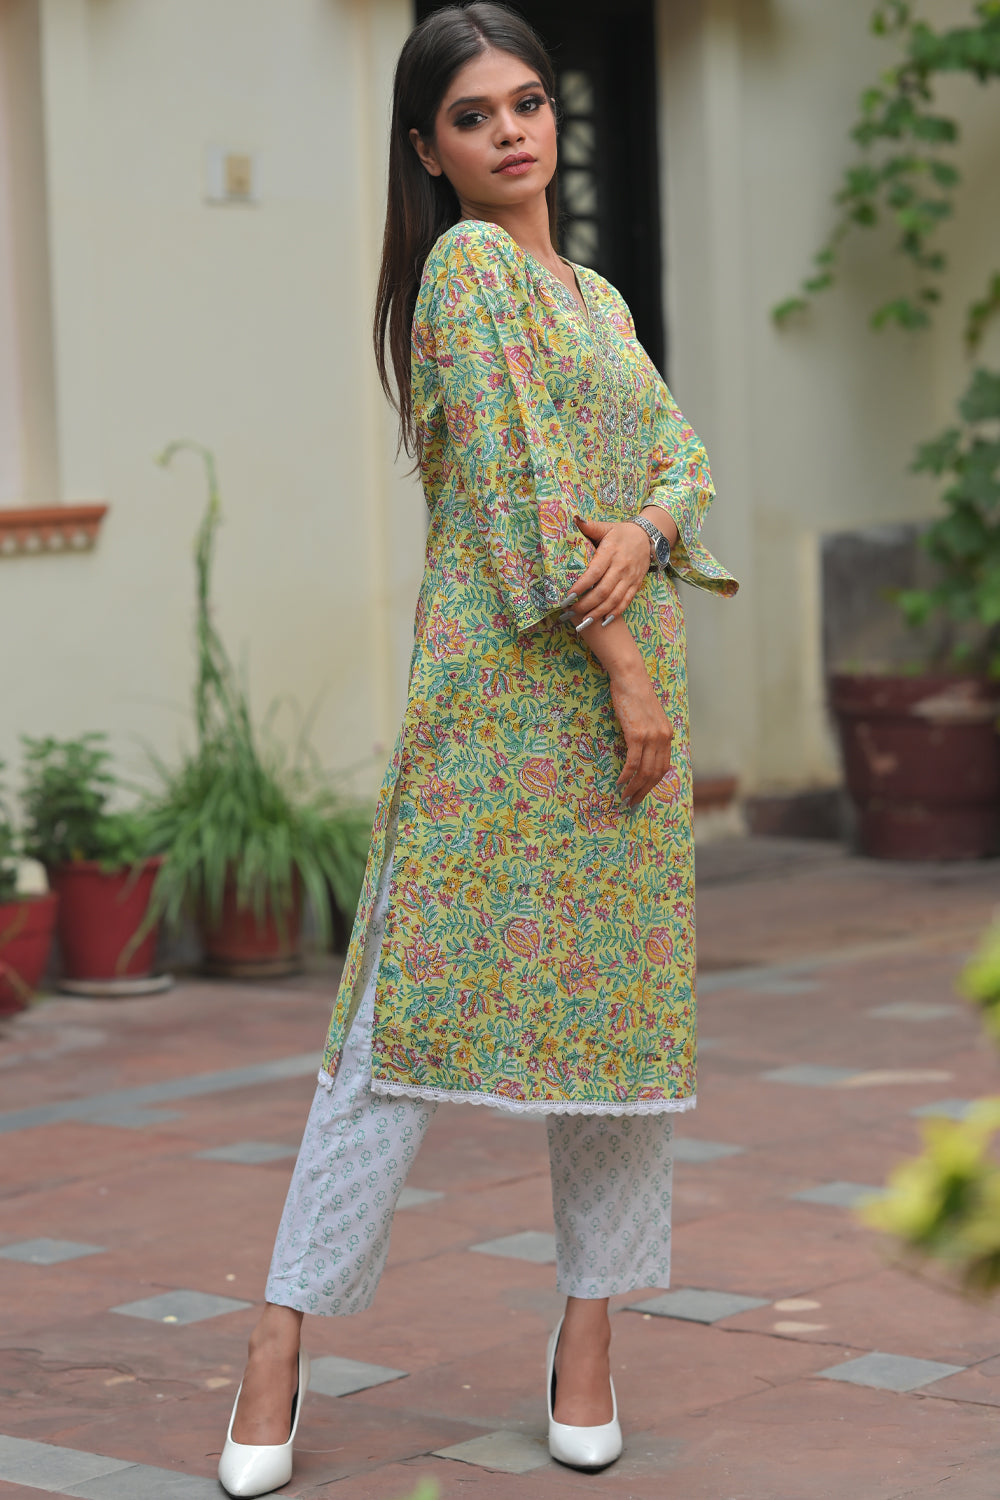 Aarzoo Lime 3 piece Suit with Kota doria Dupatta | Made To Order